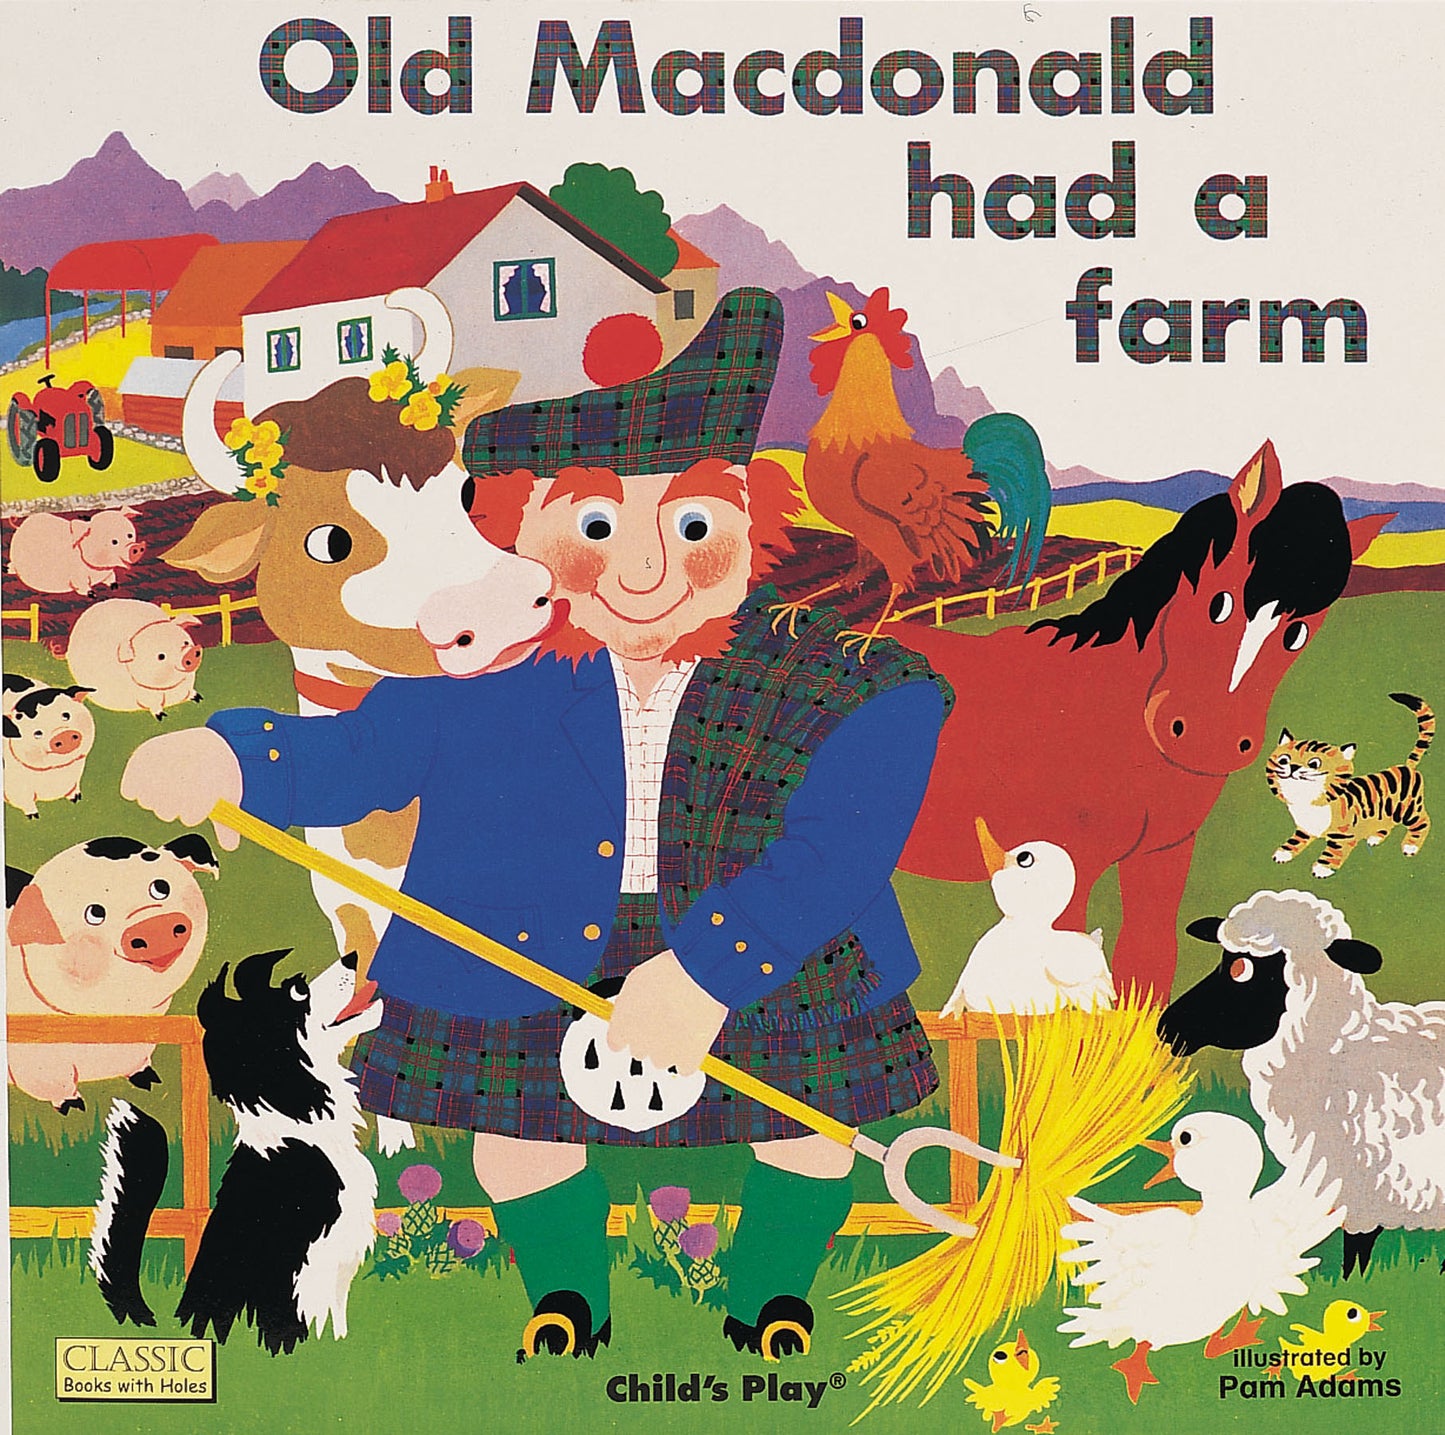 Old Macdonald had a Farm (8x8 Softcover Edition)